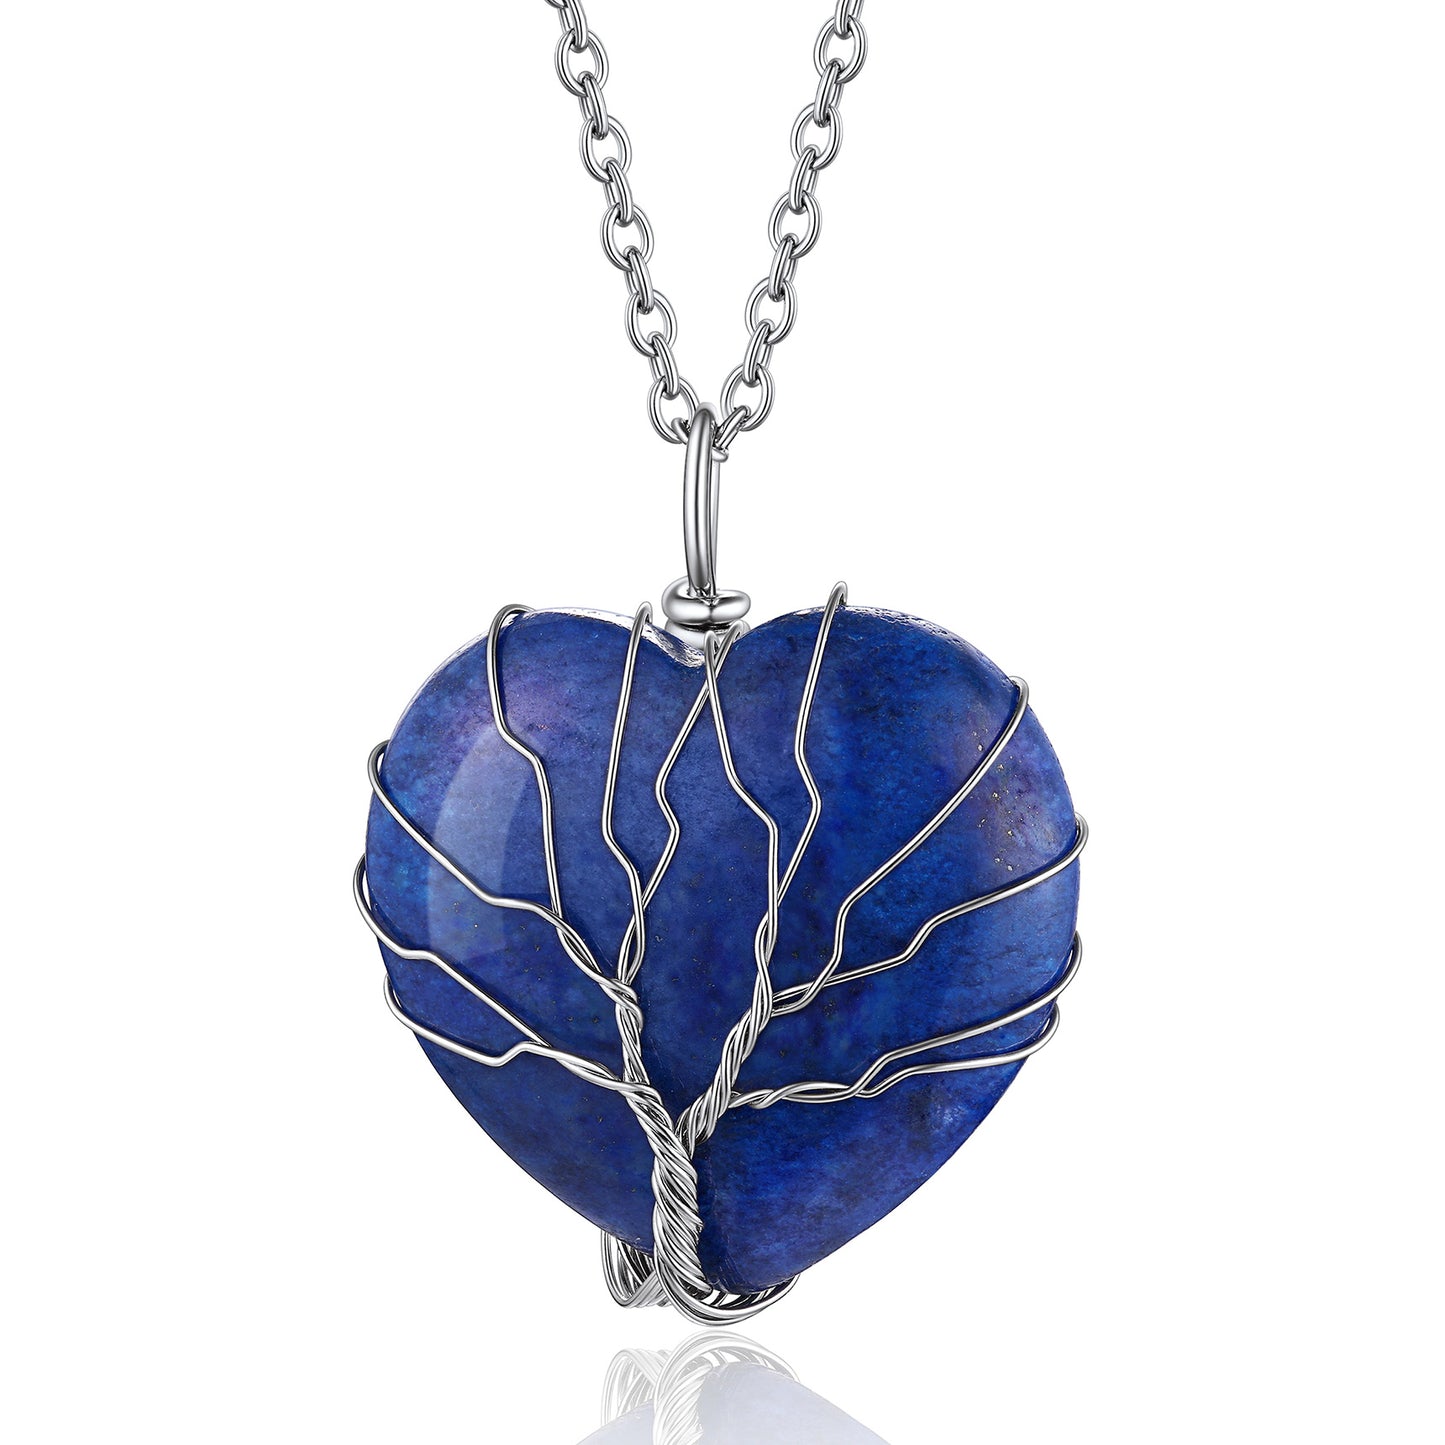 Tree of Life Wrapped Healing Heart Crystal Necklace for Women/Girls BIRTHSTONES JEWELRY